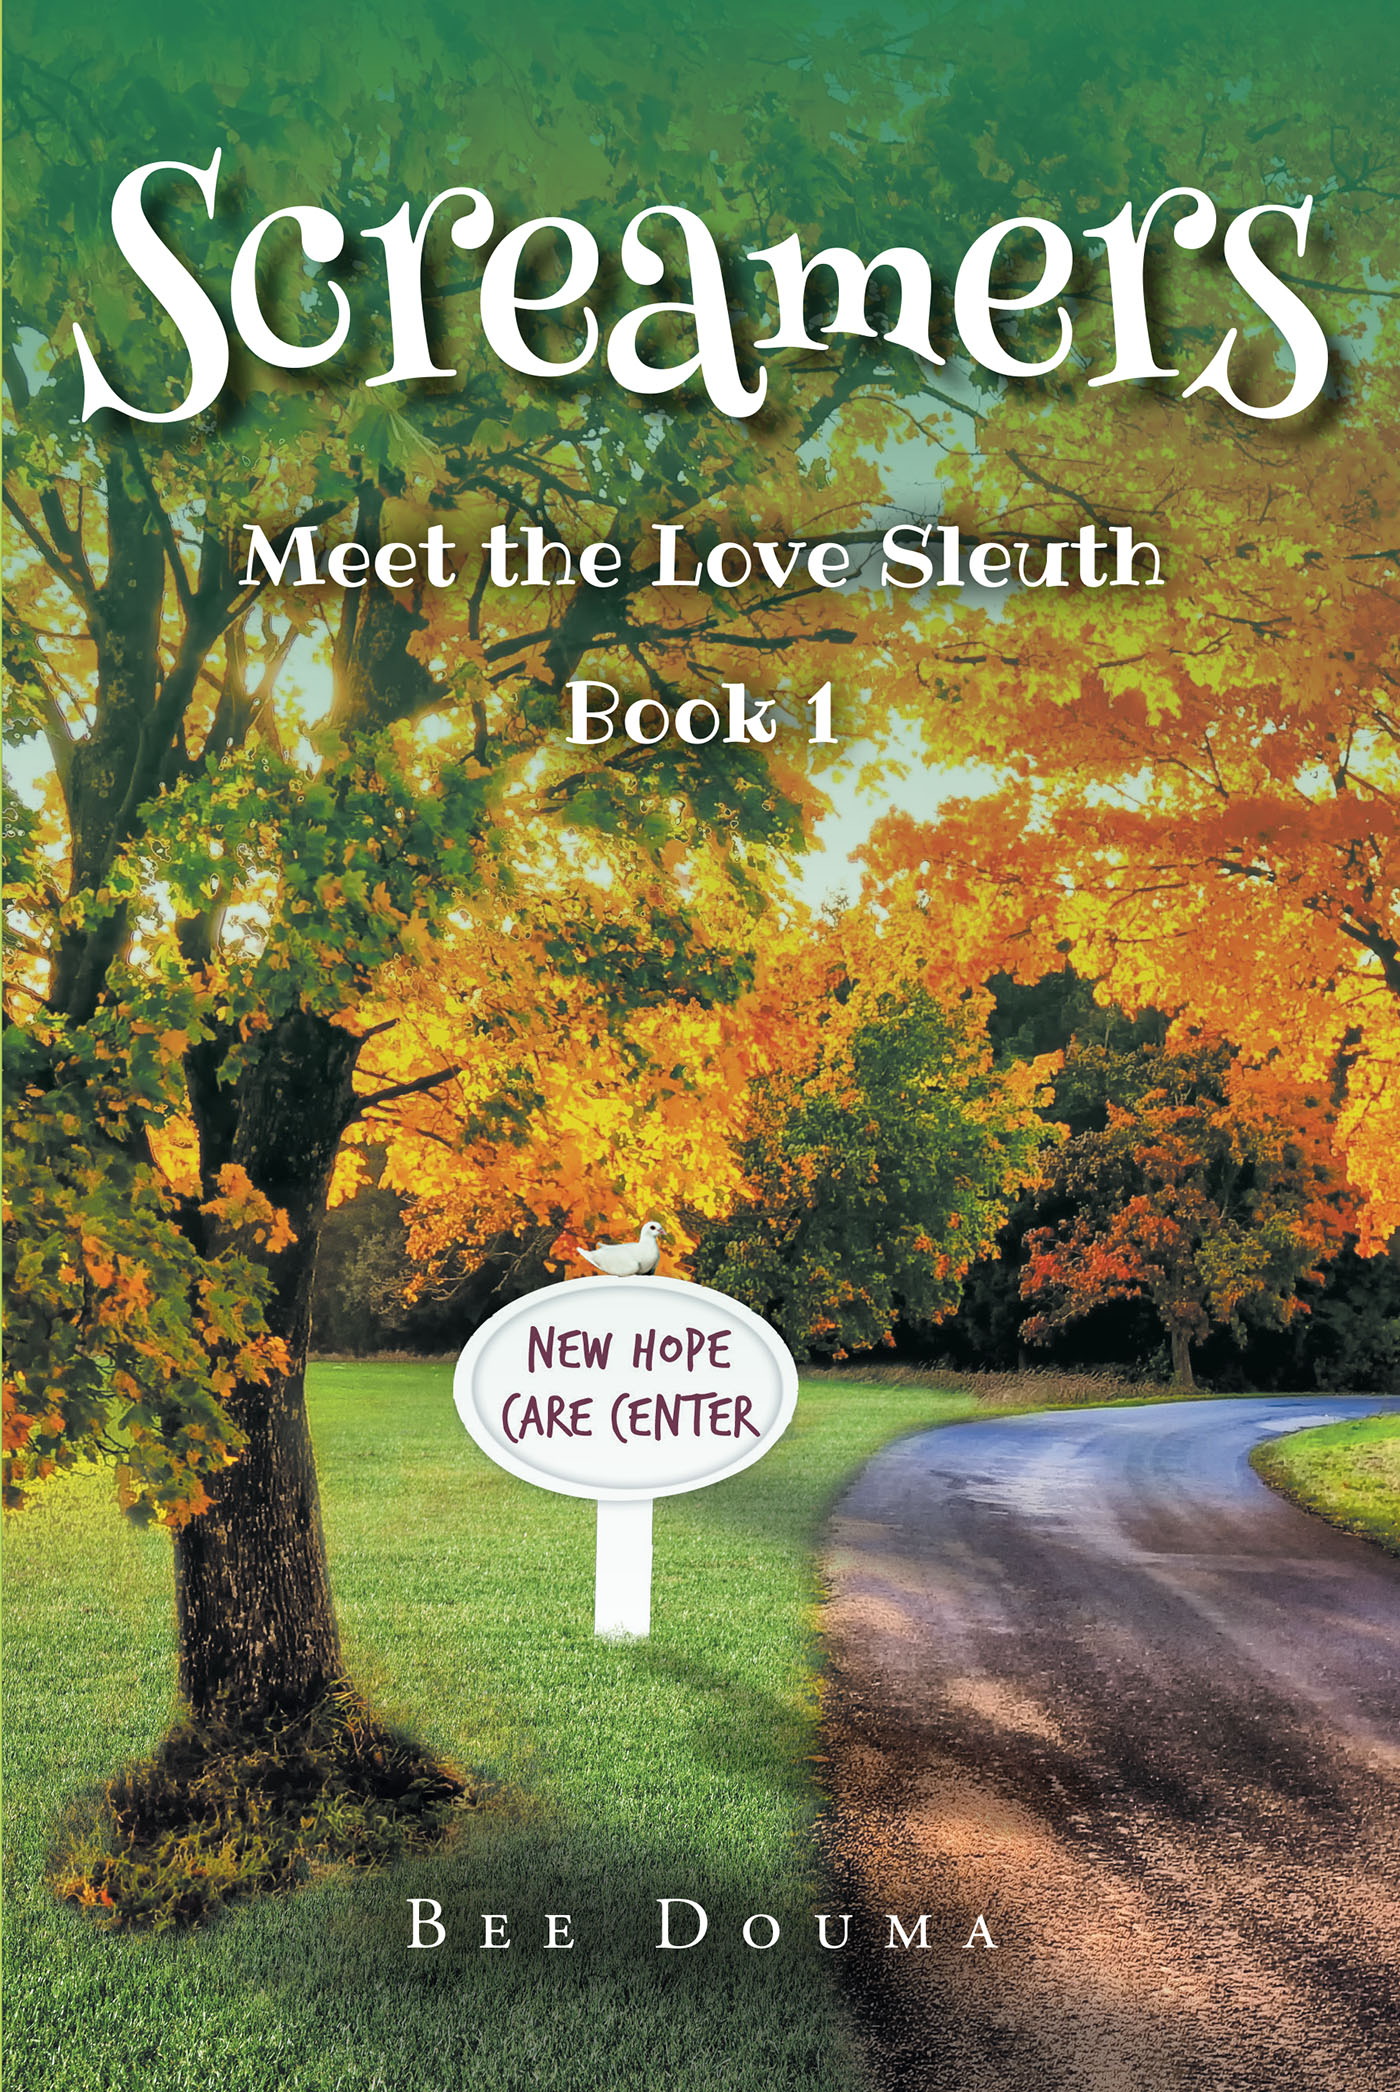 Bee Douma’s Newly Released "Screamers: Meet the Love Sleuth: Book 1" is an Enjoyable Contemporary Fiction That Explores Love, Faith, and Uncertainty